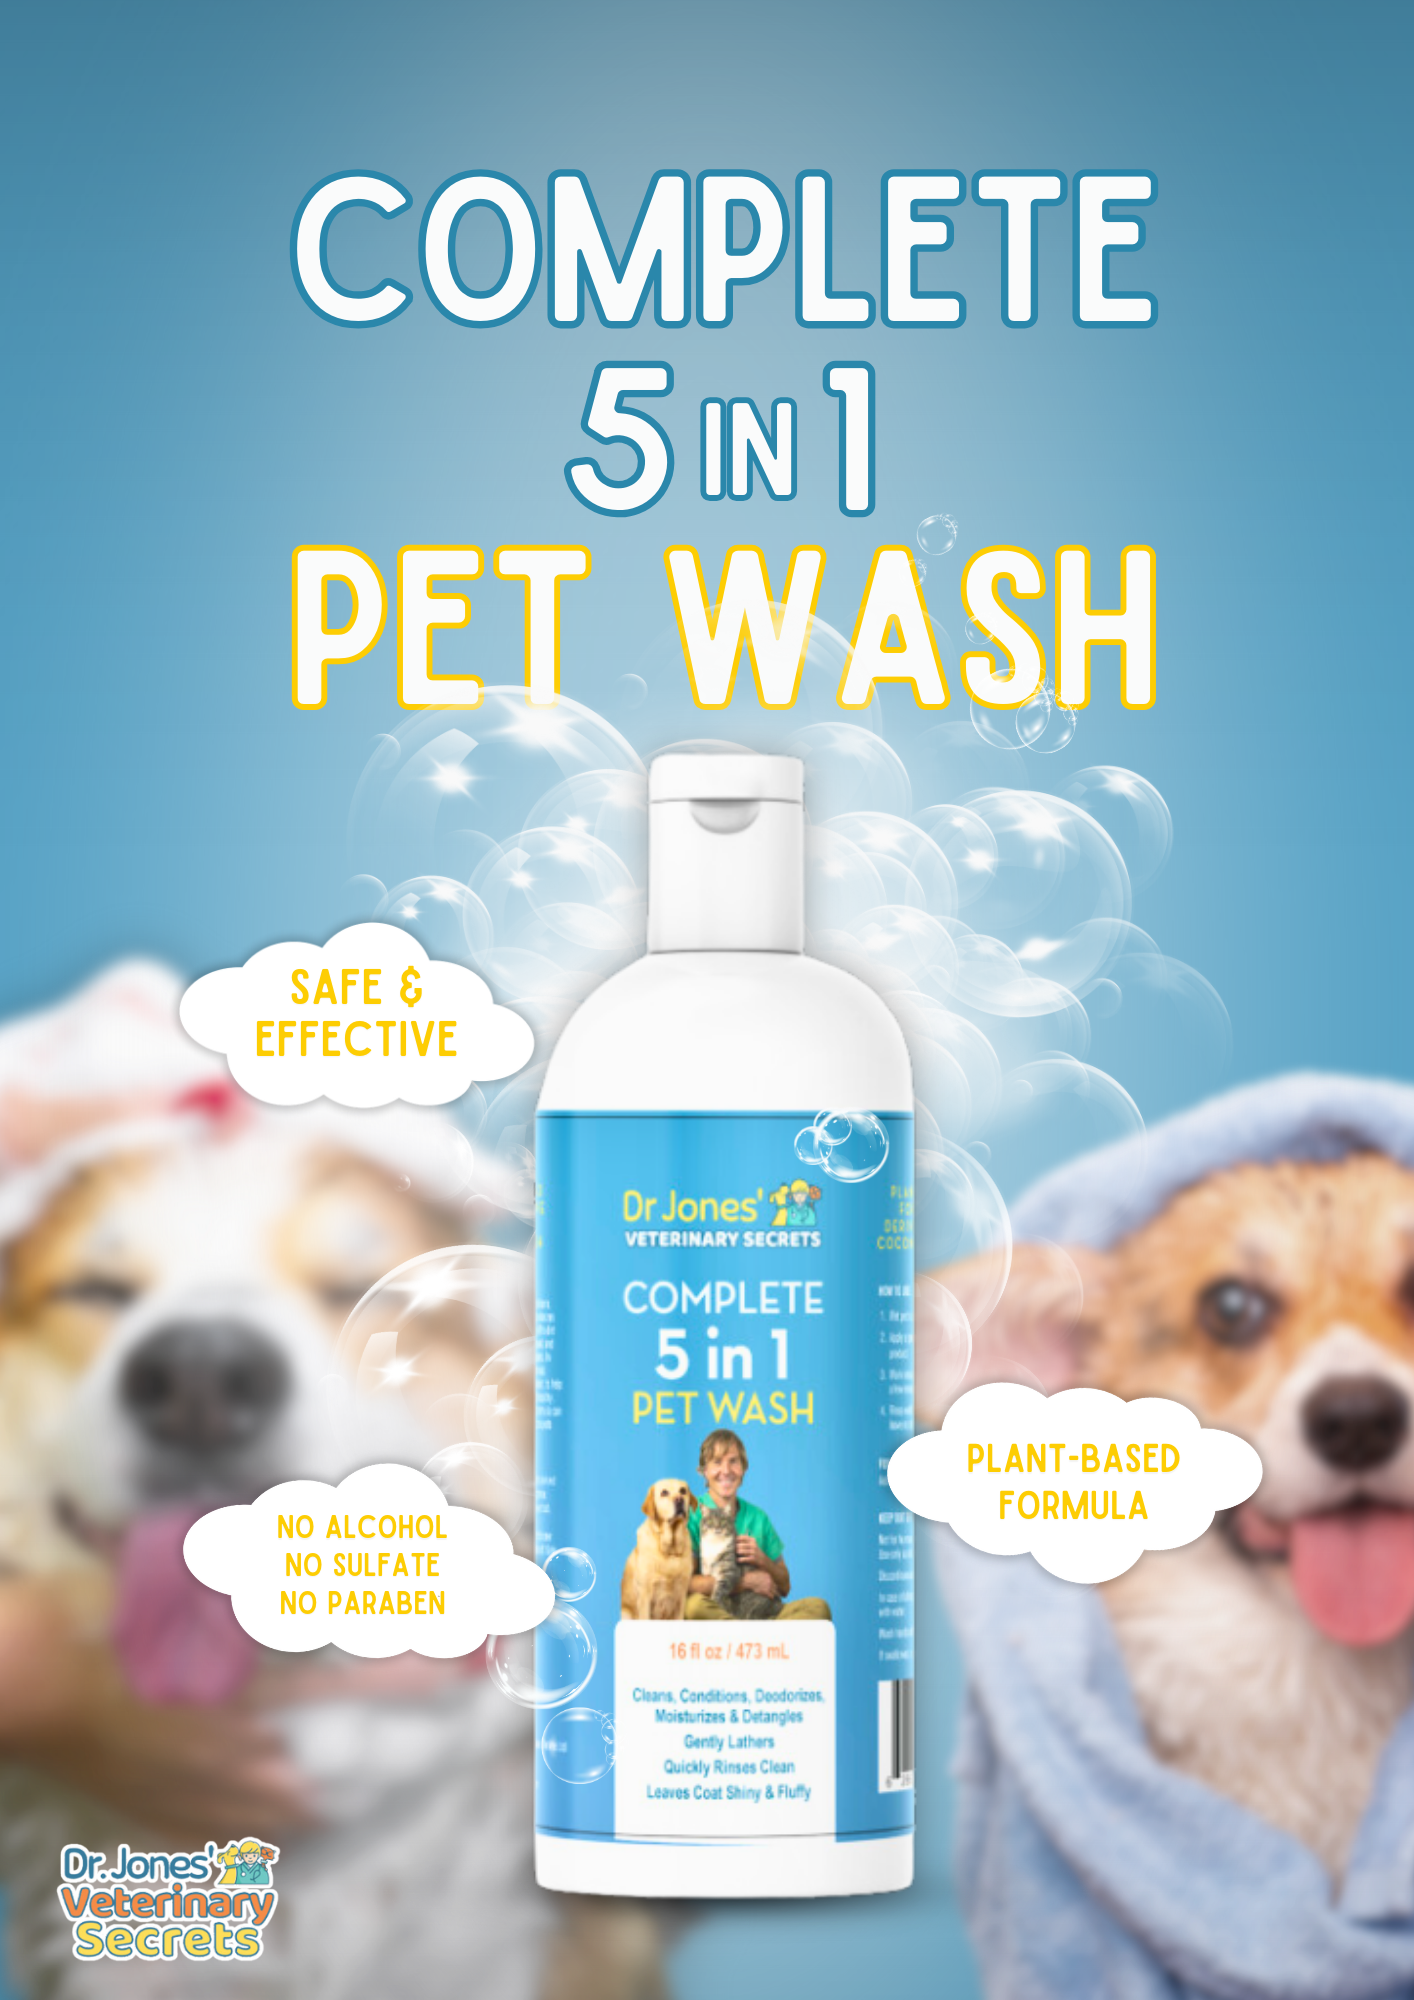 Dr. Jones' Complete 5 in 1 Pet Wash presents an excellent choice as an all-natural shampoo and conditioner for pets, boasting a formula free from alcohol, sulfates, parabens, and MEA or DEA.